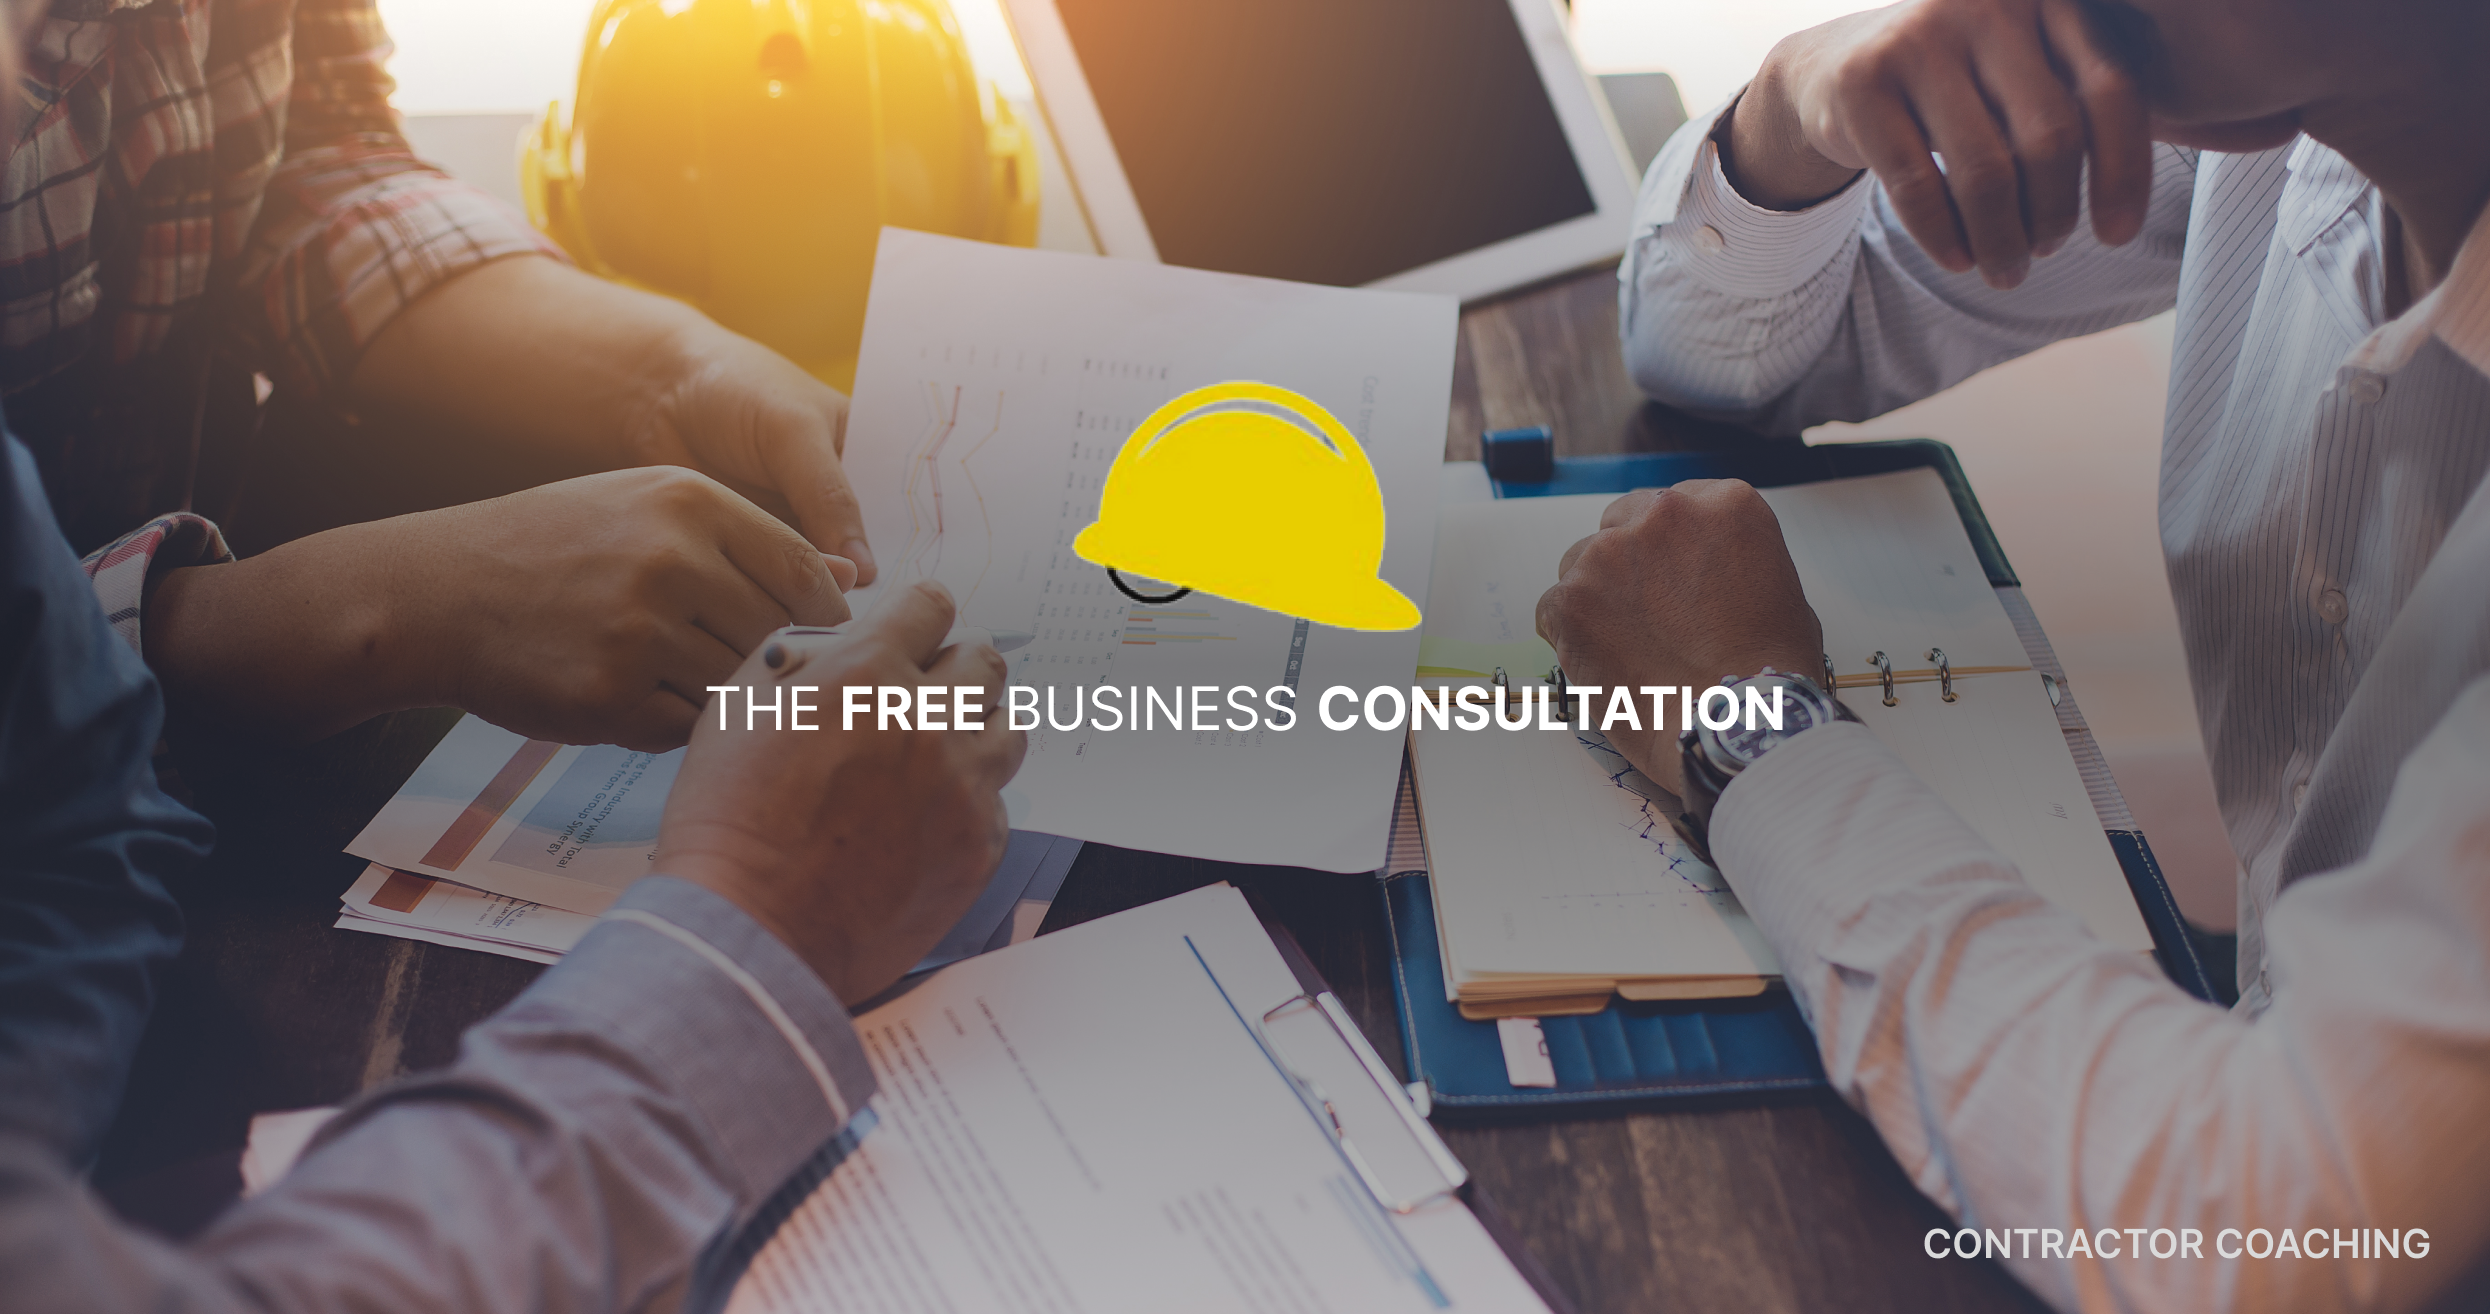 Free Business Consultation for Contractors - Contractor Coaching